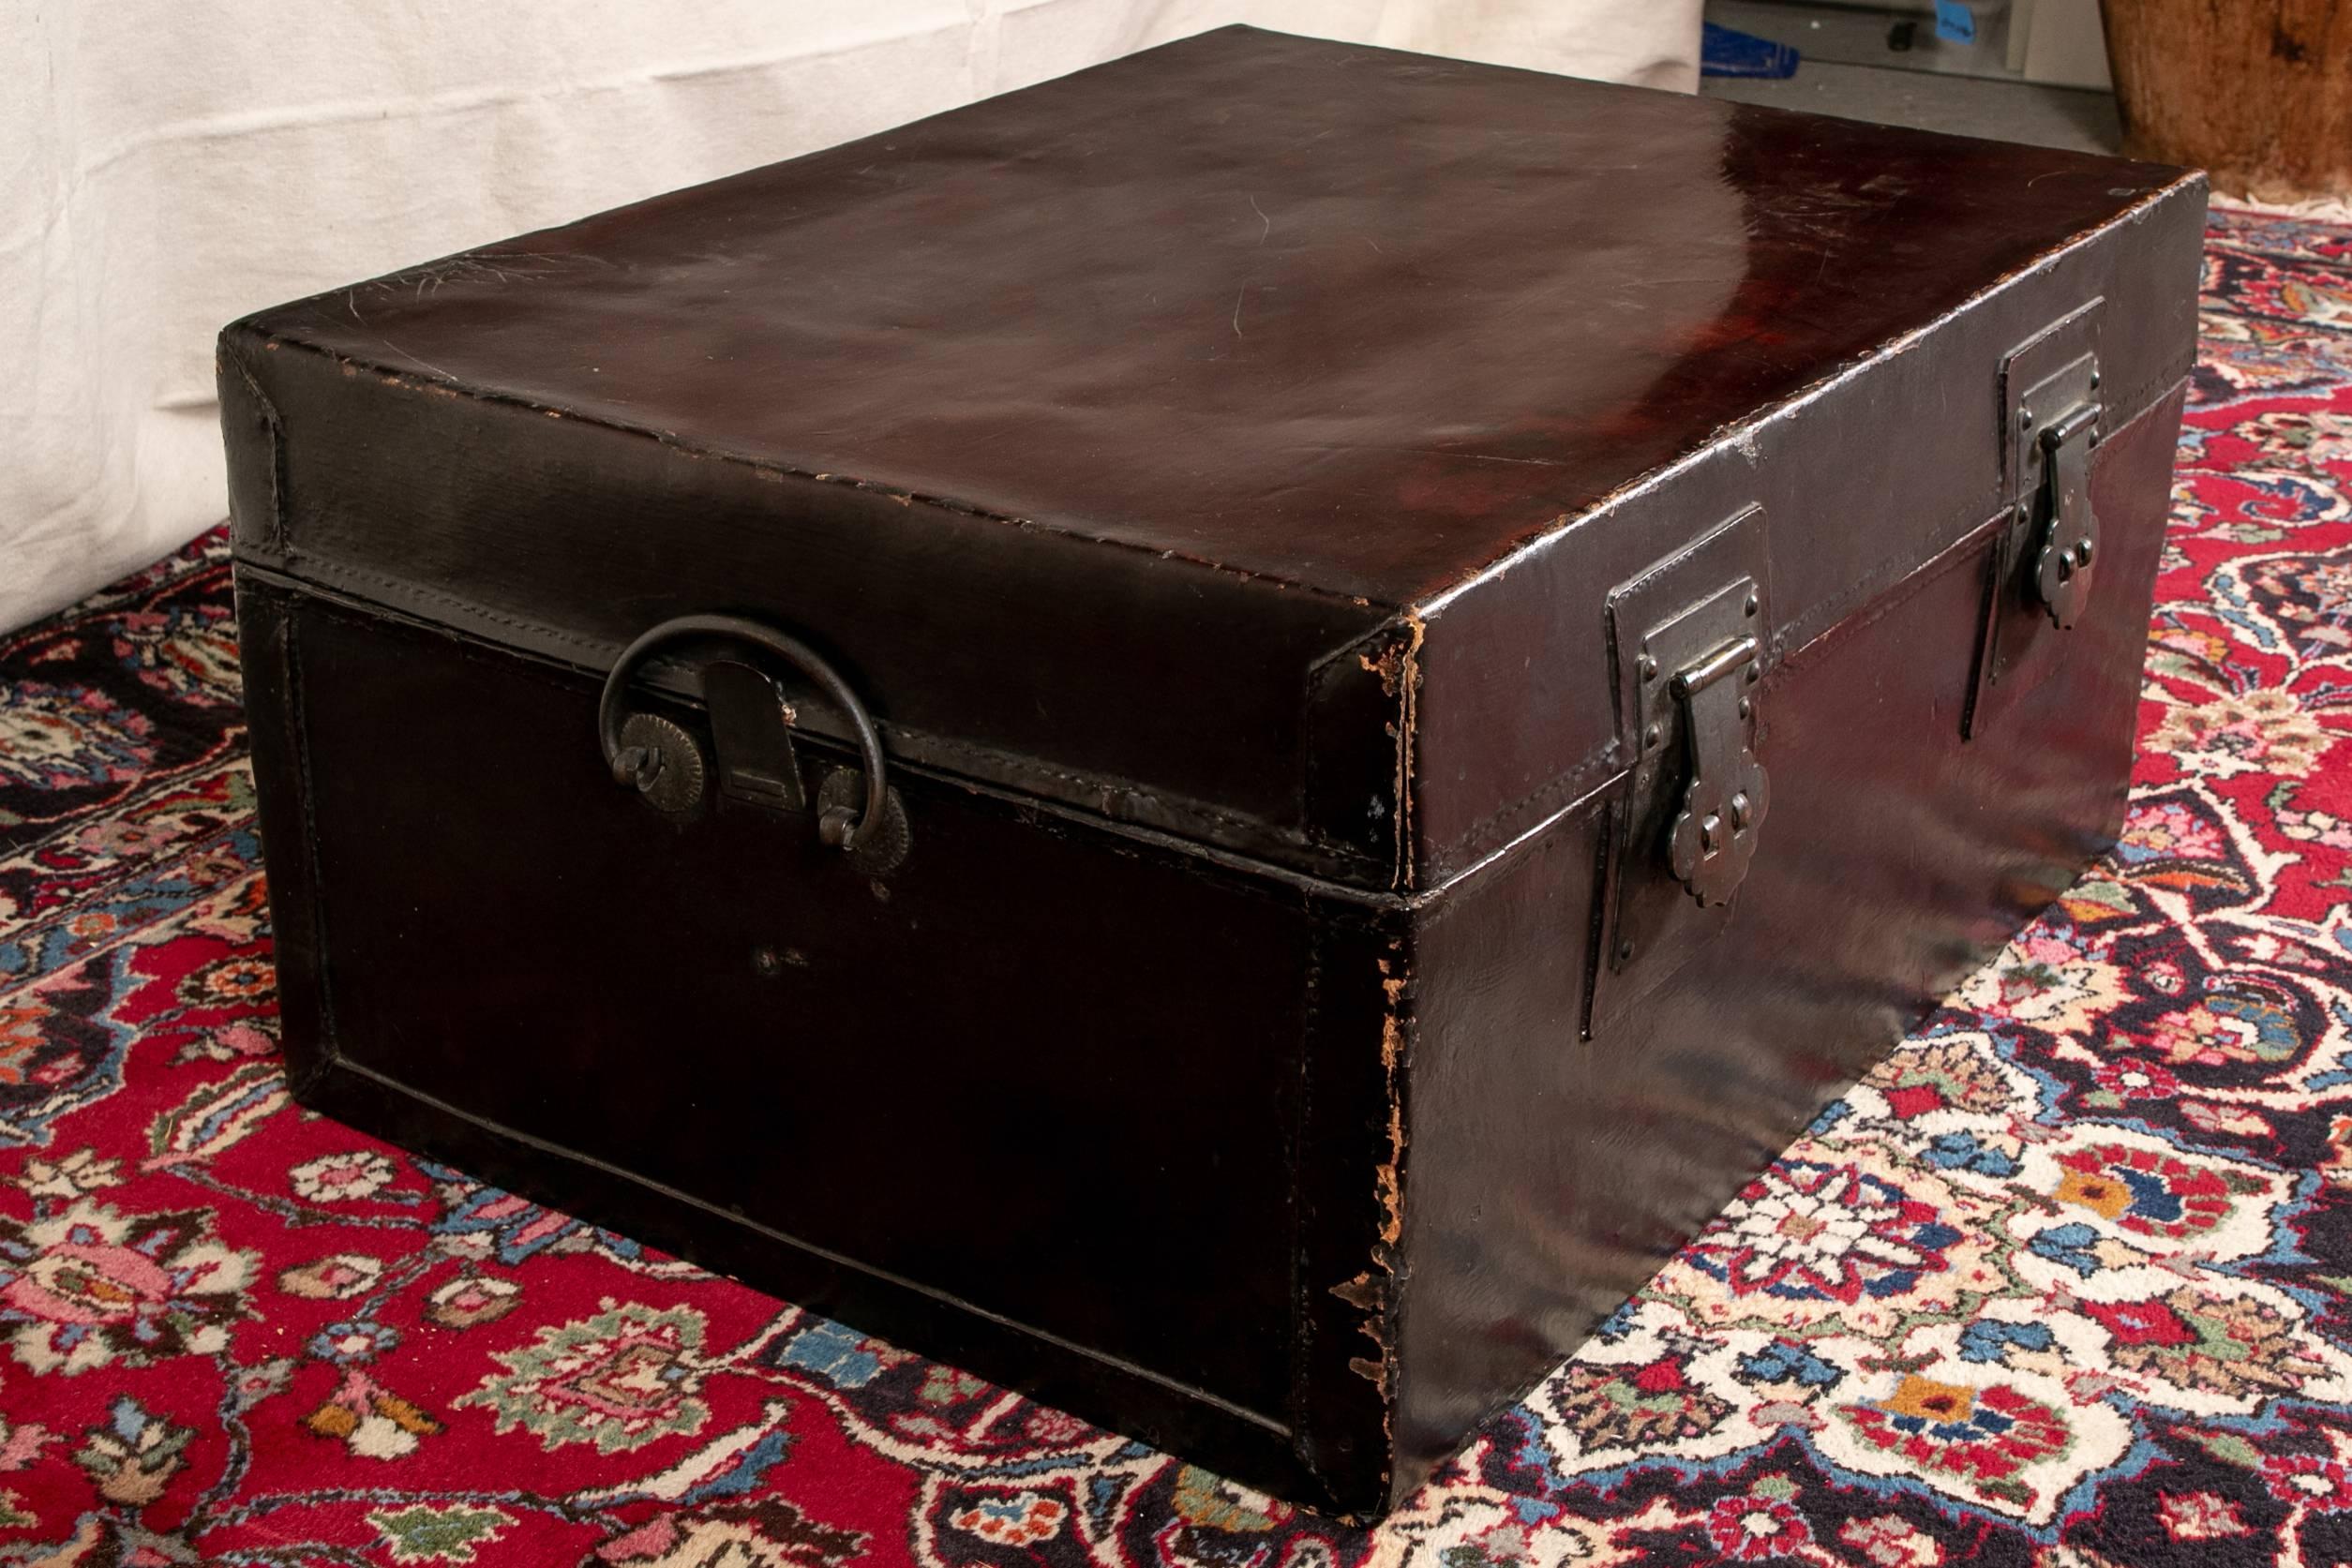 Asian trunk as coffee table, lacquer and Pig skin  in black with an oxblood tone top, nice vintage patina, with iron hinges, locks (lacking the pins), and side carry handles. 

Condition: Expected wear and signs of use including worn top.